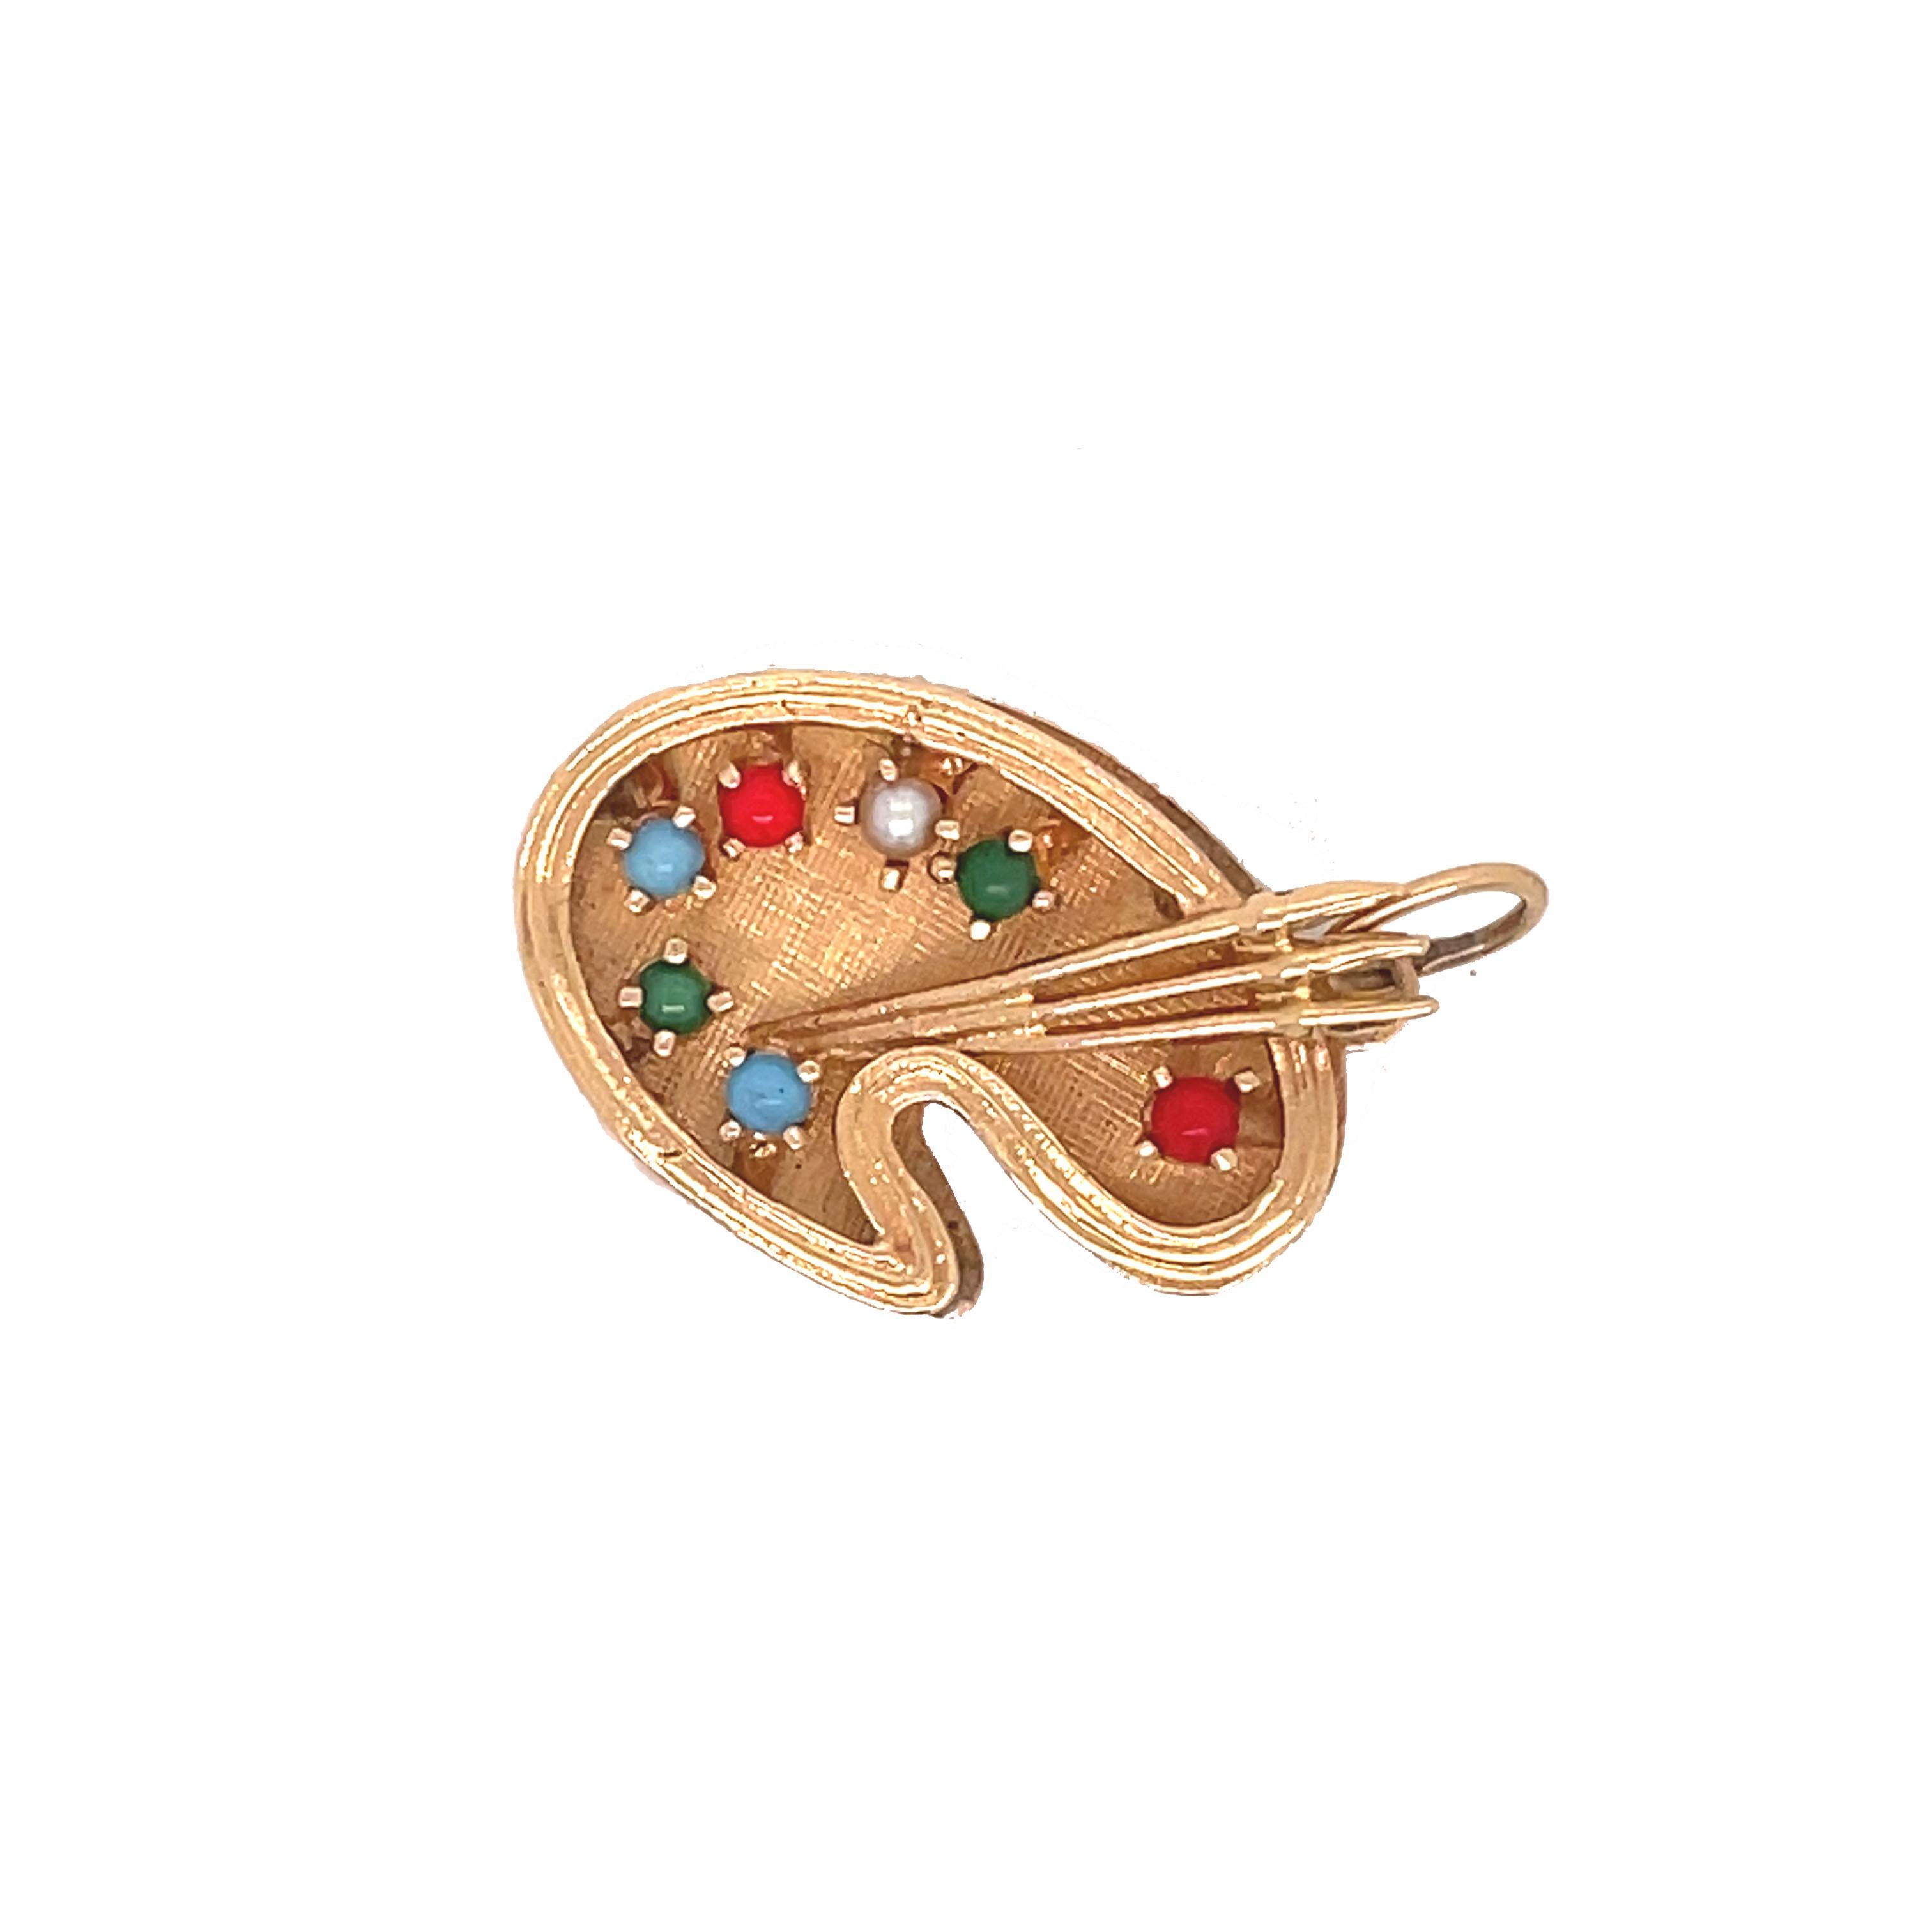 This lovely charm from the 1960s set in 14K yellow gold depicts a multi-stone artist's palette! You indeed won't find a charm quite like this one! You can genuinely see the craftsmanship and detail that went into creating this item, from the etched